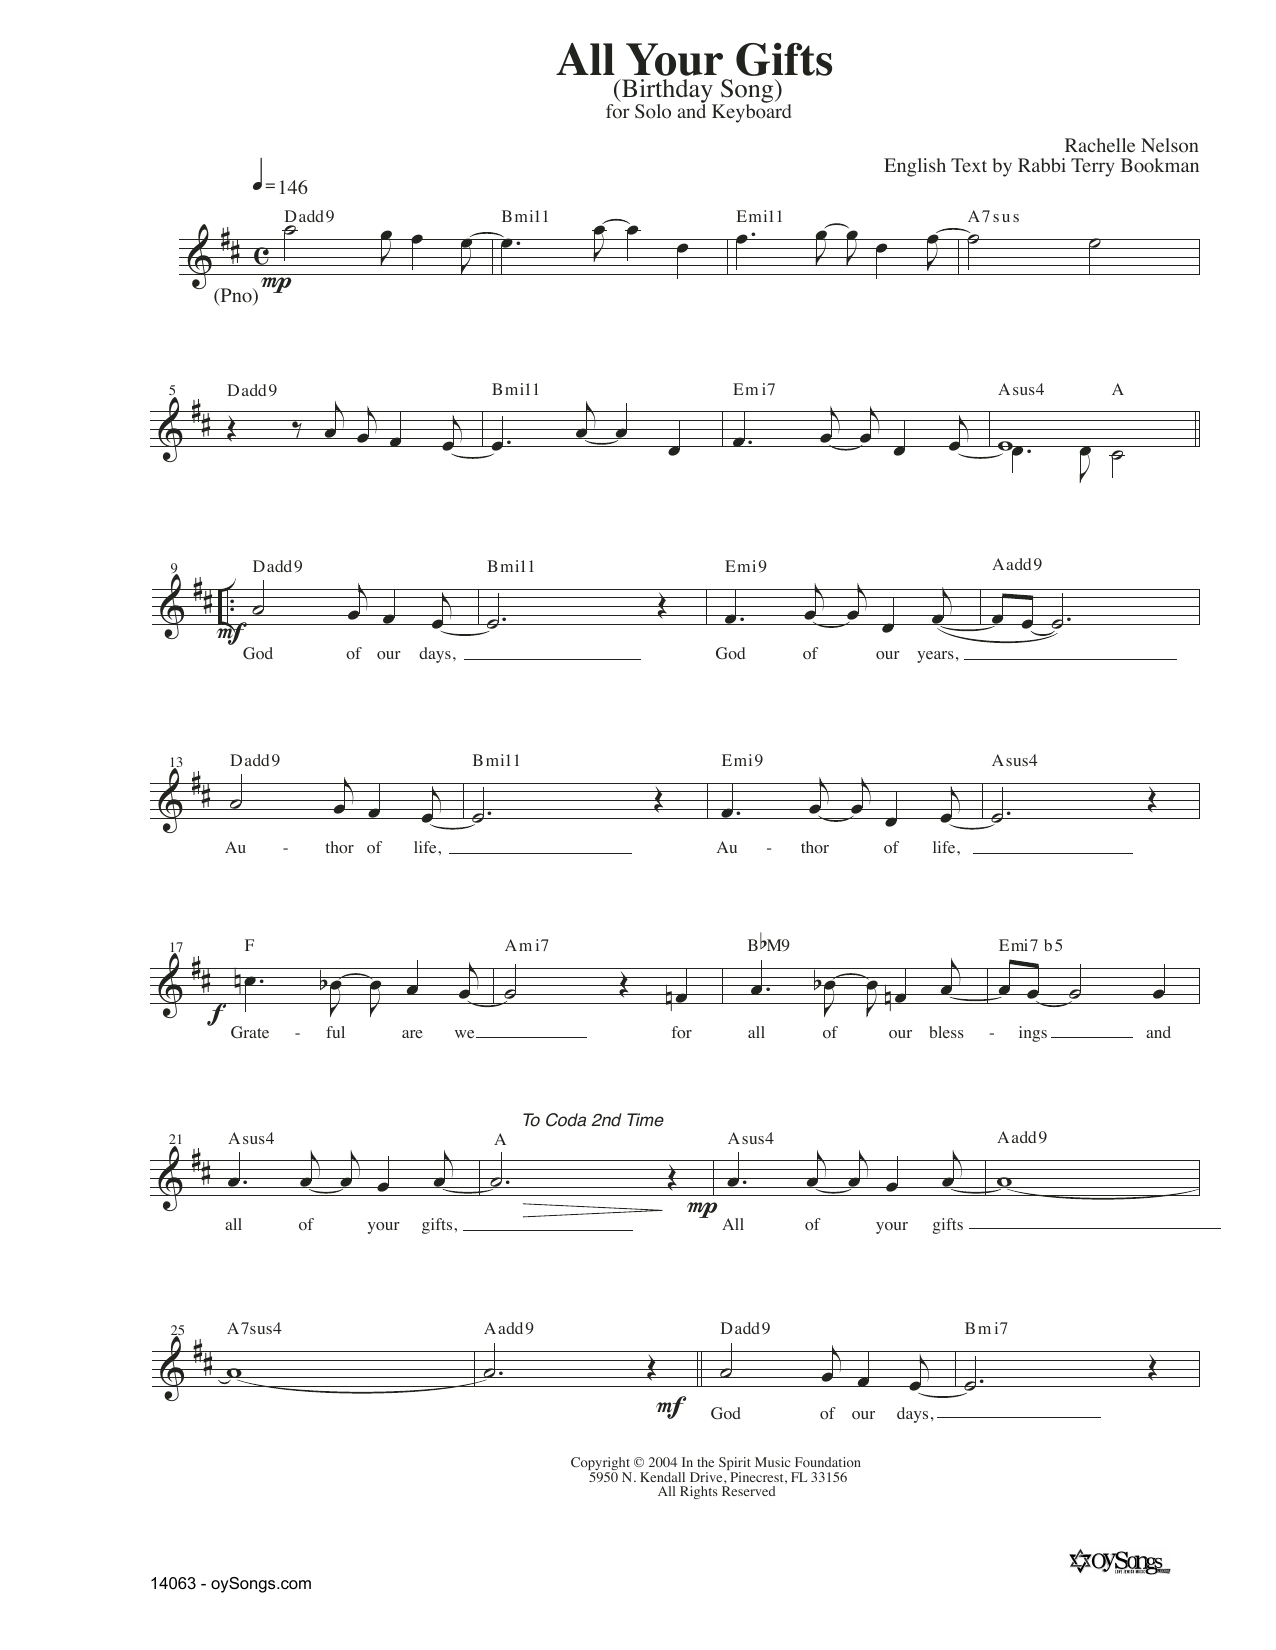 Download Rachelle Nelson All Your Gifts Sheet Music